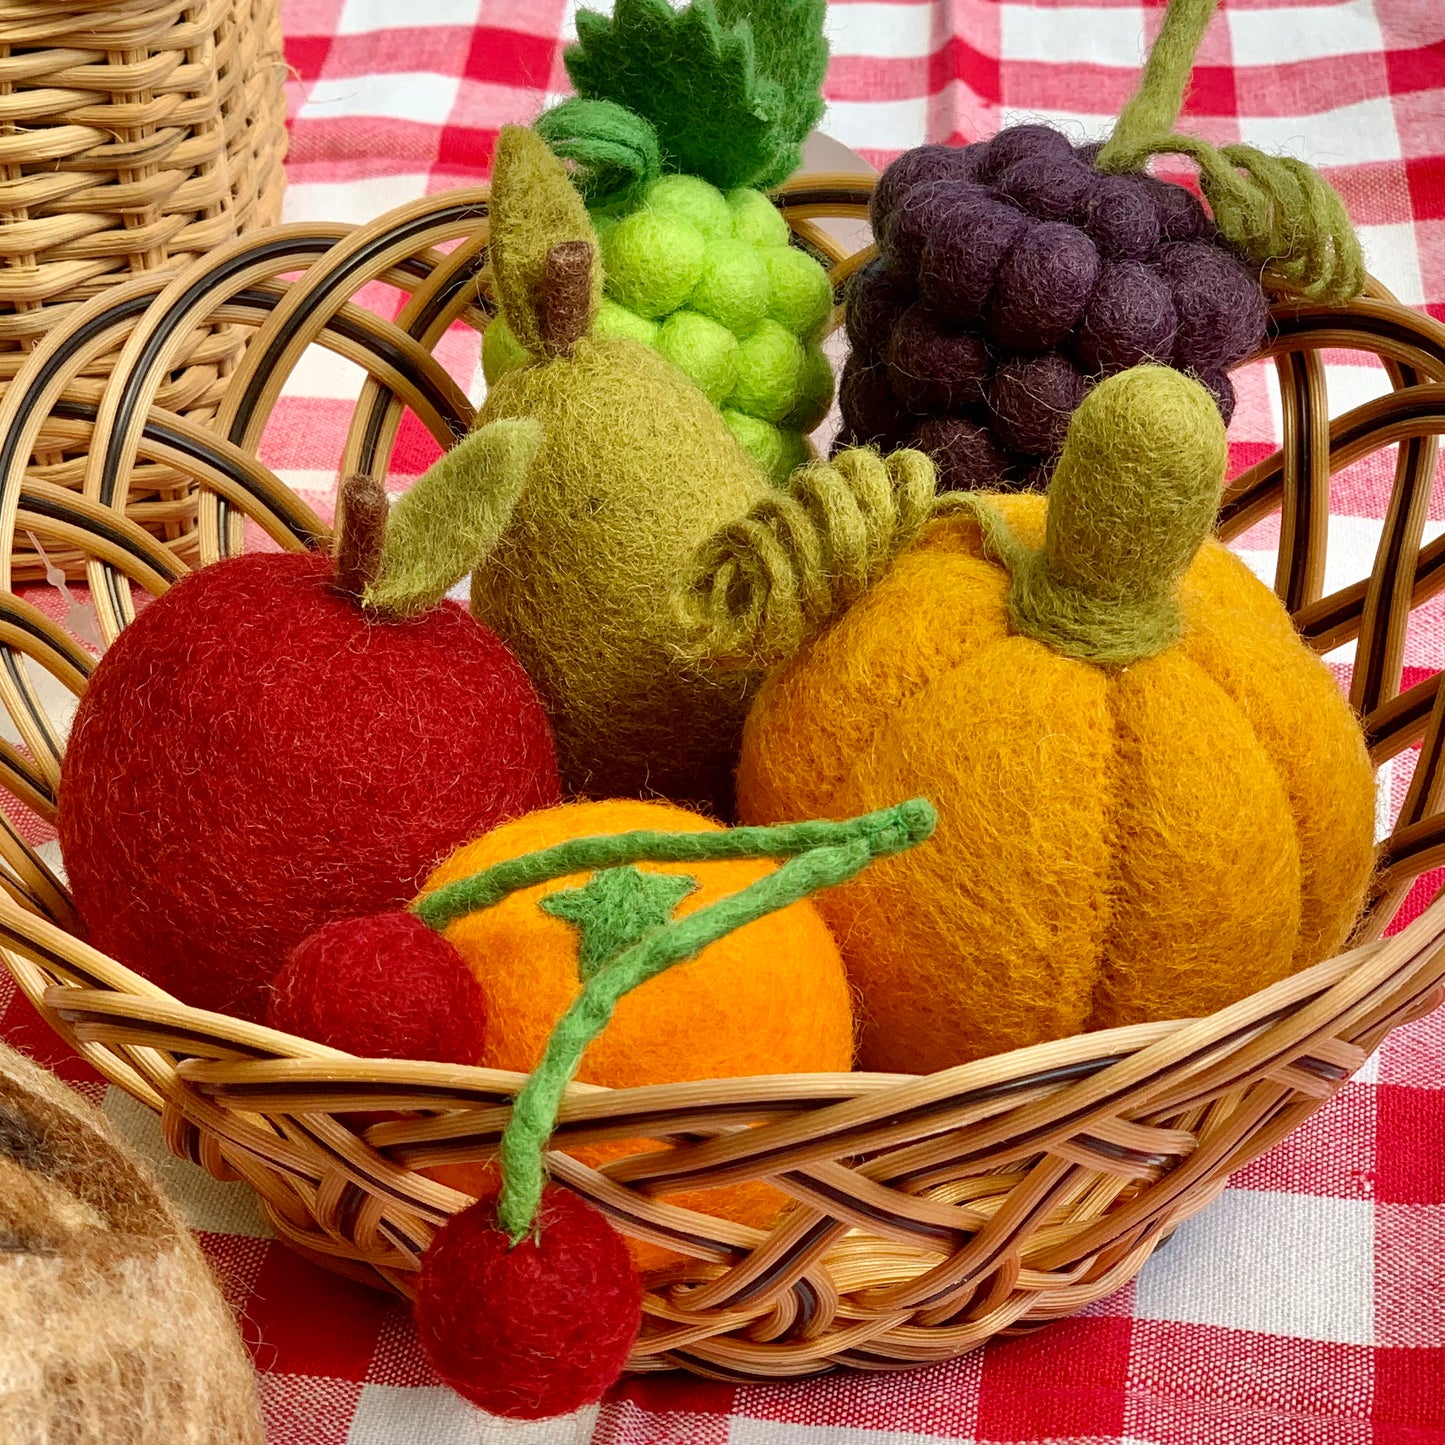 Needle-felted Play Food Green Grapes